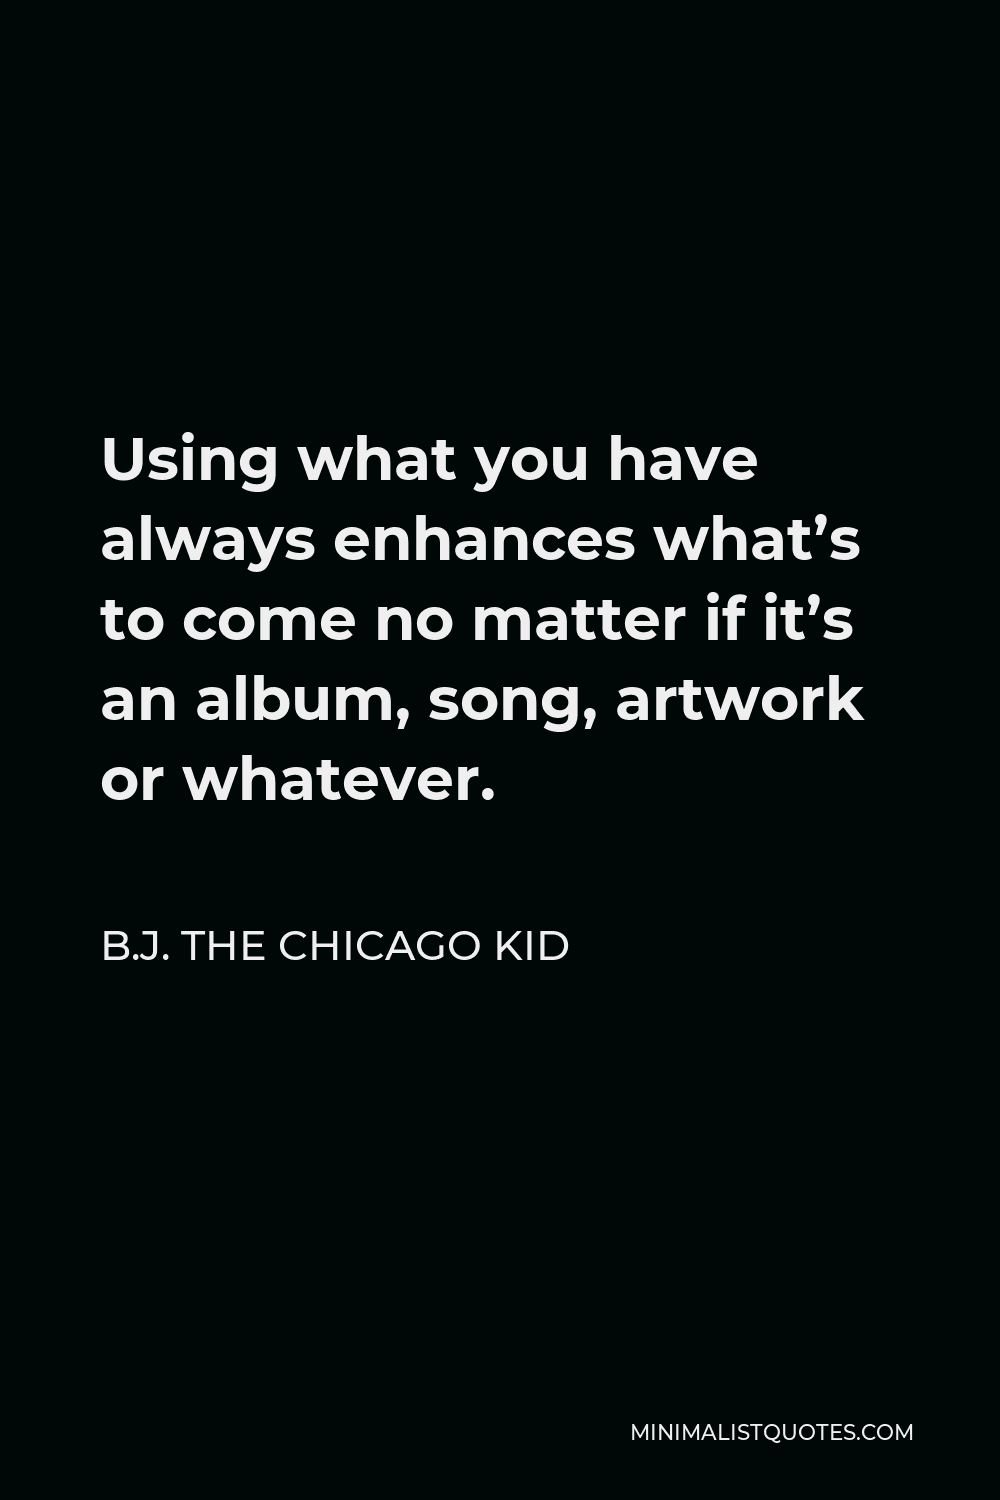 B.J. The Chicago Kid Quote - Using what you have always enhances what’s to come no matter if it’s an album, song, artwork or whatever.